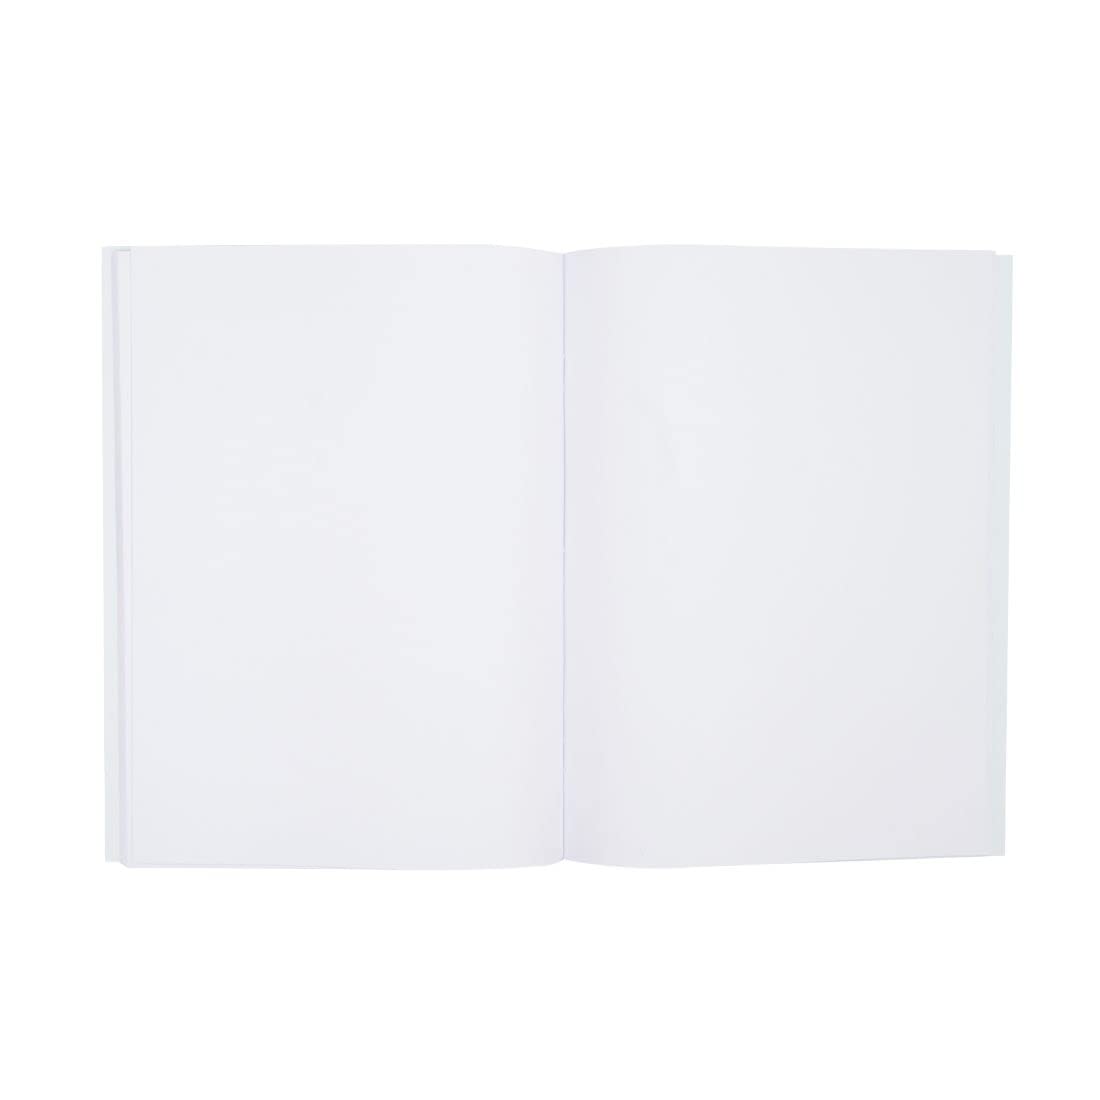 Doms Neon Series Soft Bound Notebook | Unruled, 200 Pages | 29.7 x 21 CM | The Book is Sturdy & Long Lasting | Pack Of 1 | Color & Design May Vary